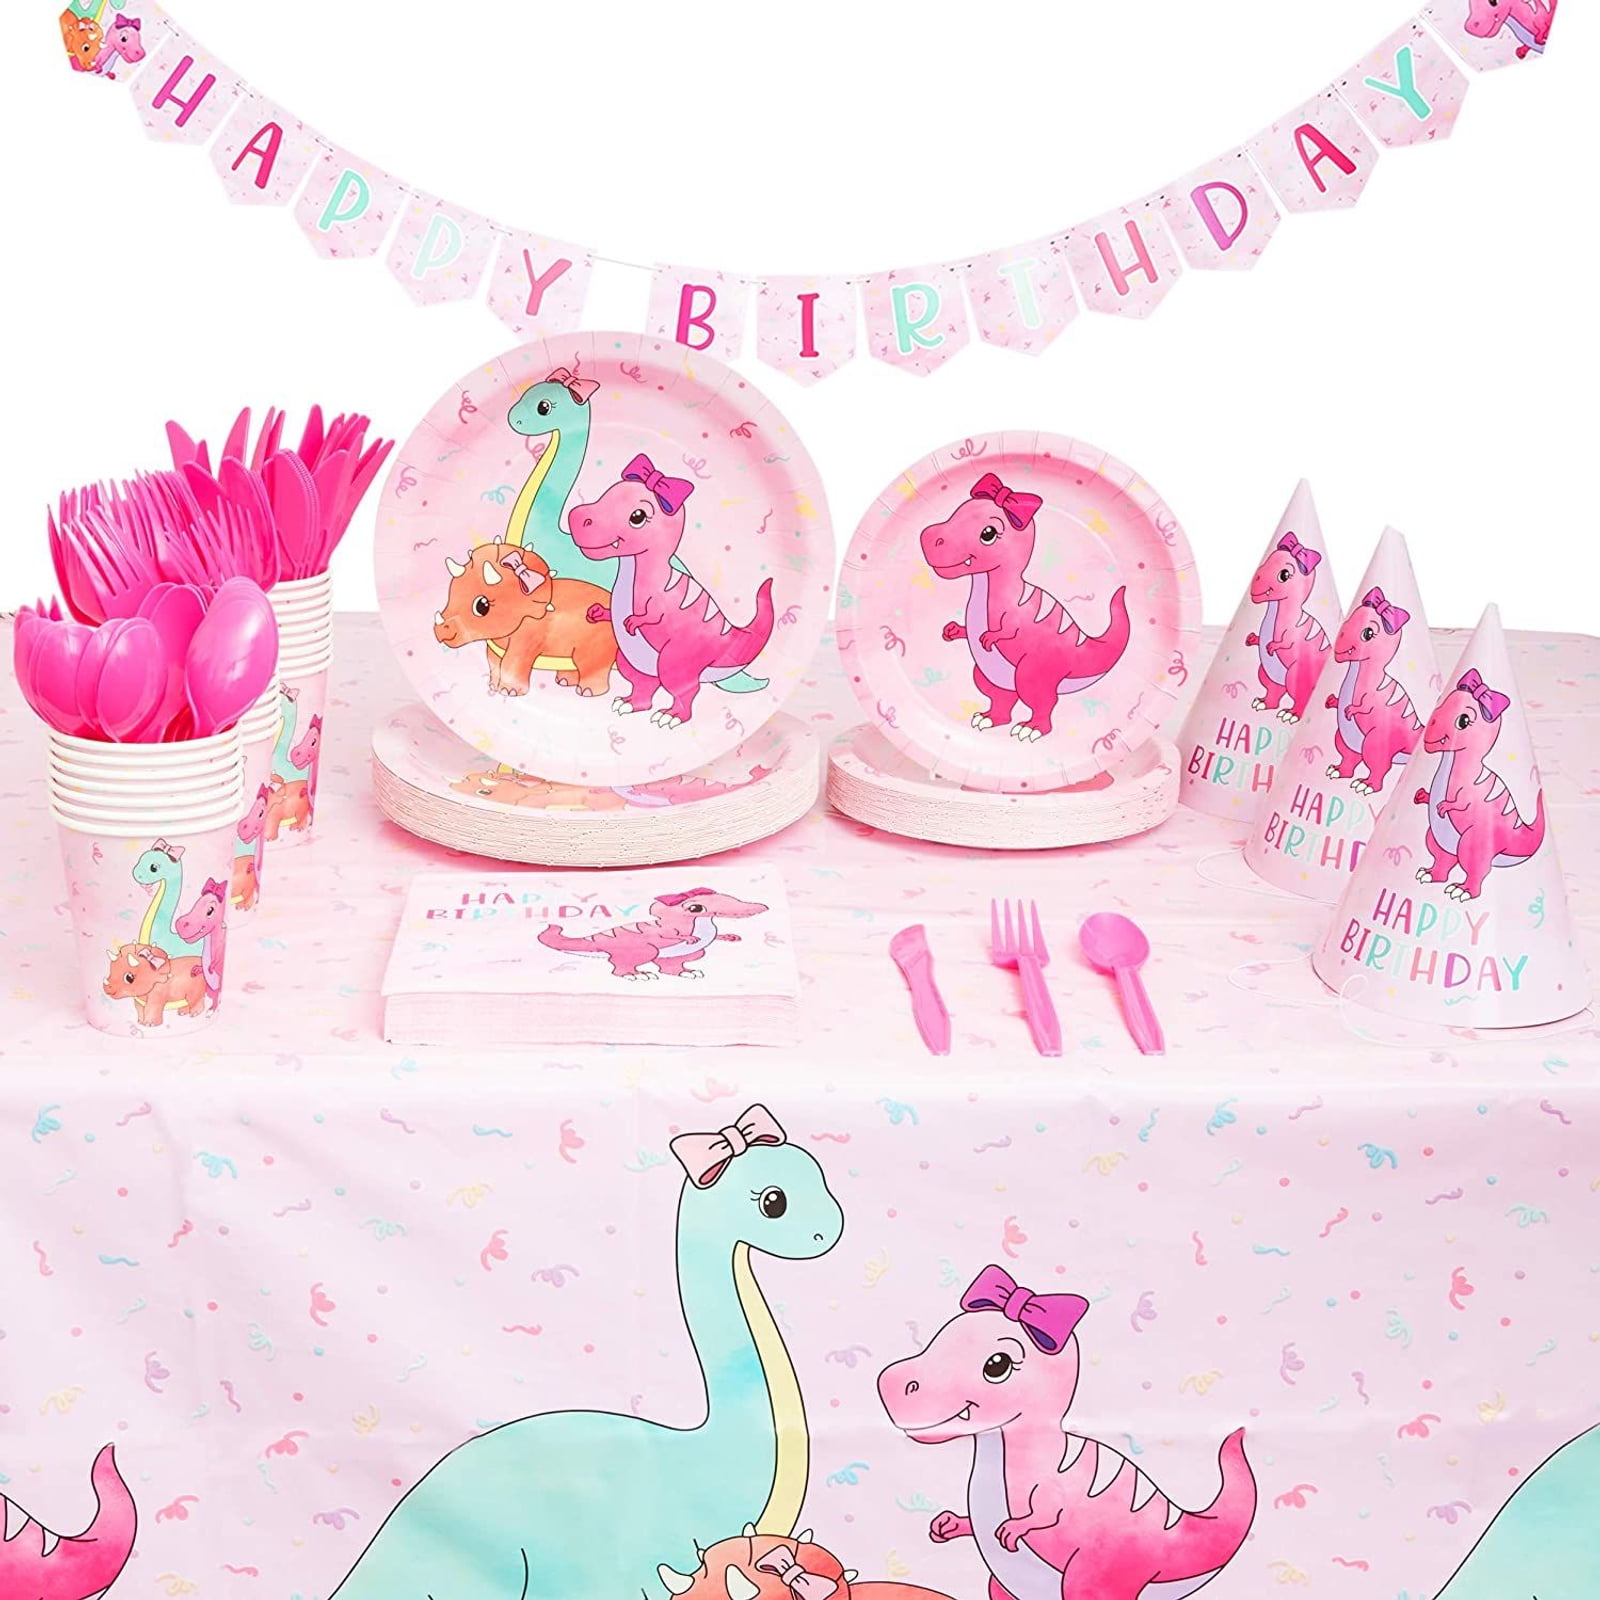 Friendly Dinosaur Party Themed Bundle Includes Plates Napkins & Cups for 8 Guests TLP Party Partysaurus Dinosaur Party Supply Pack